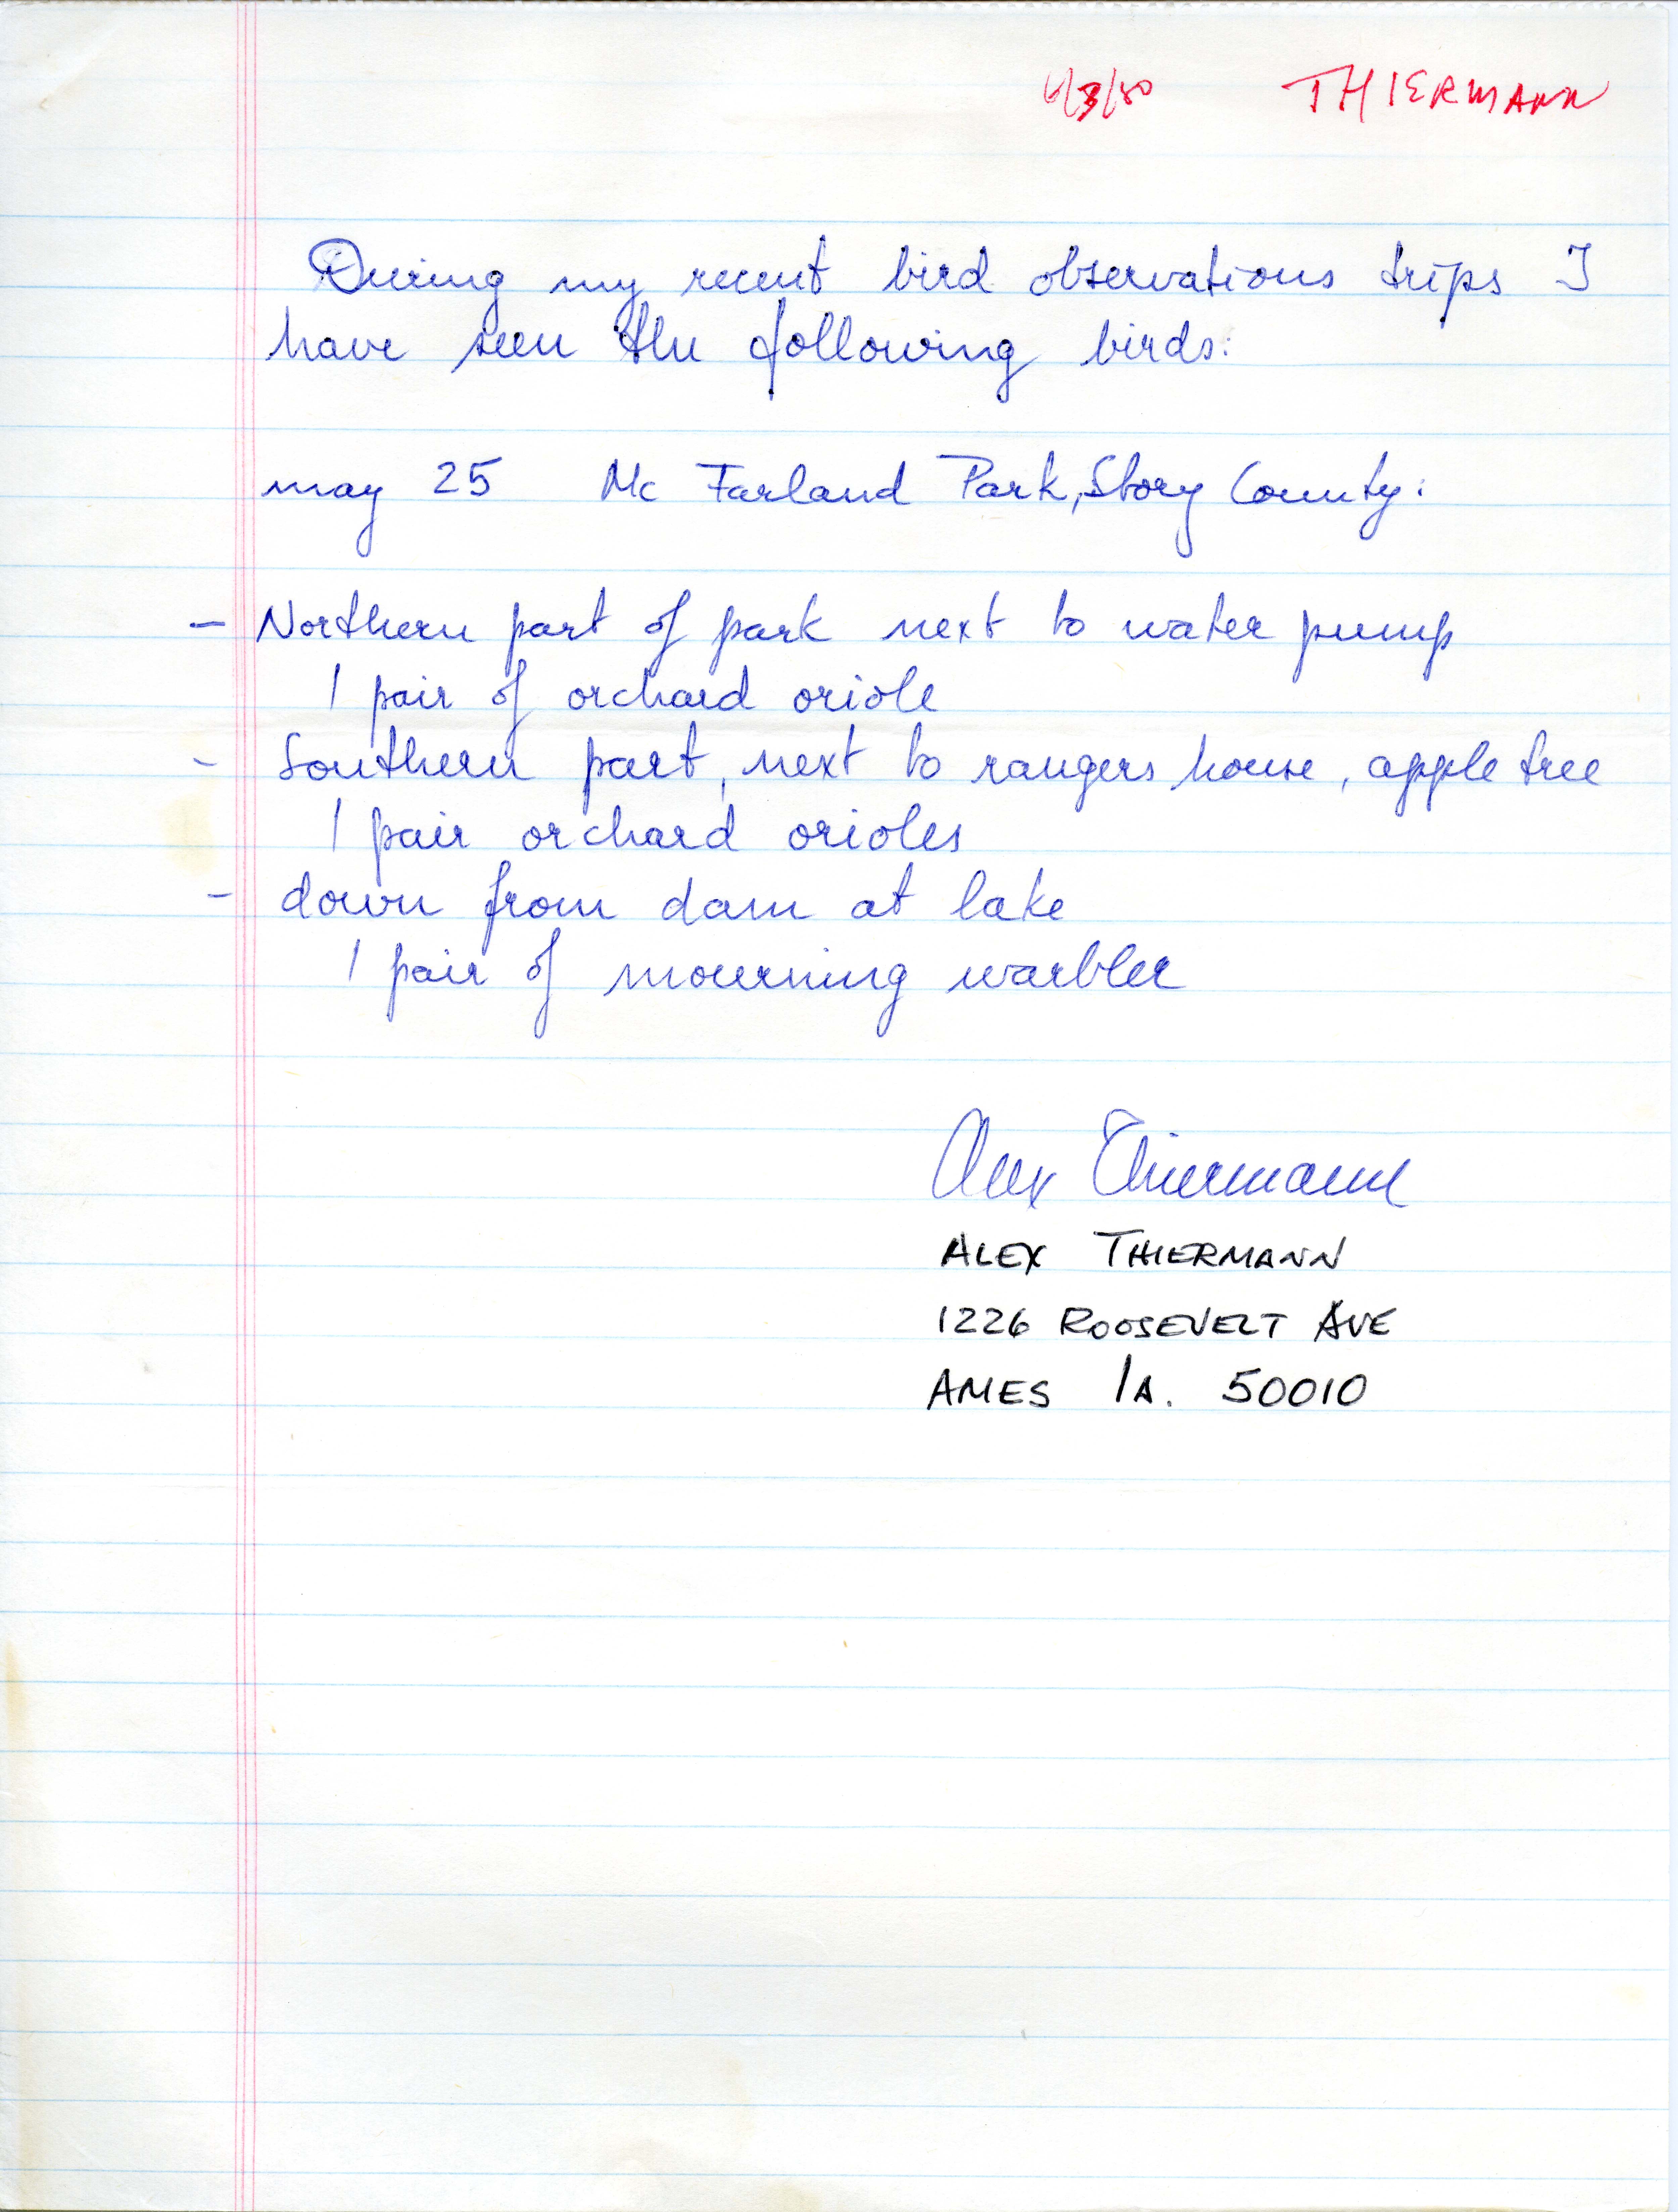 Field notes contributed by Alex Thiermann, spring 1980